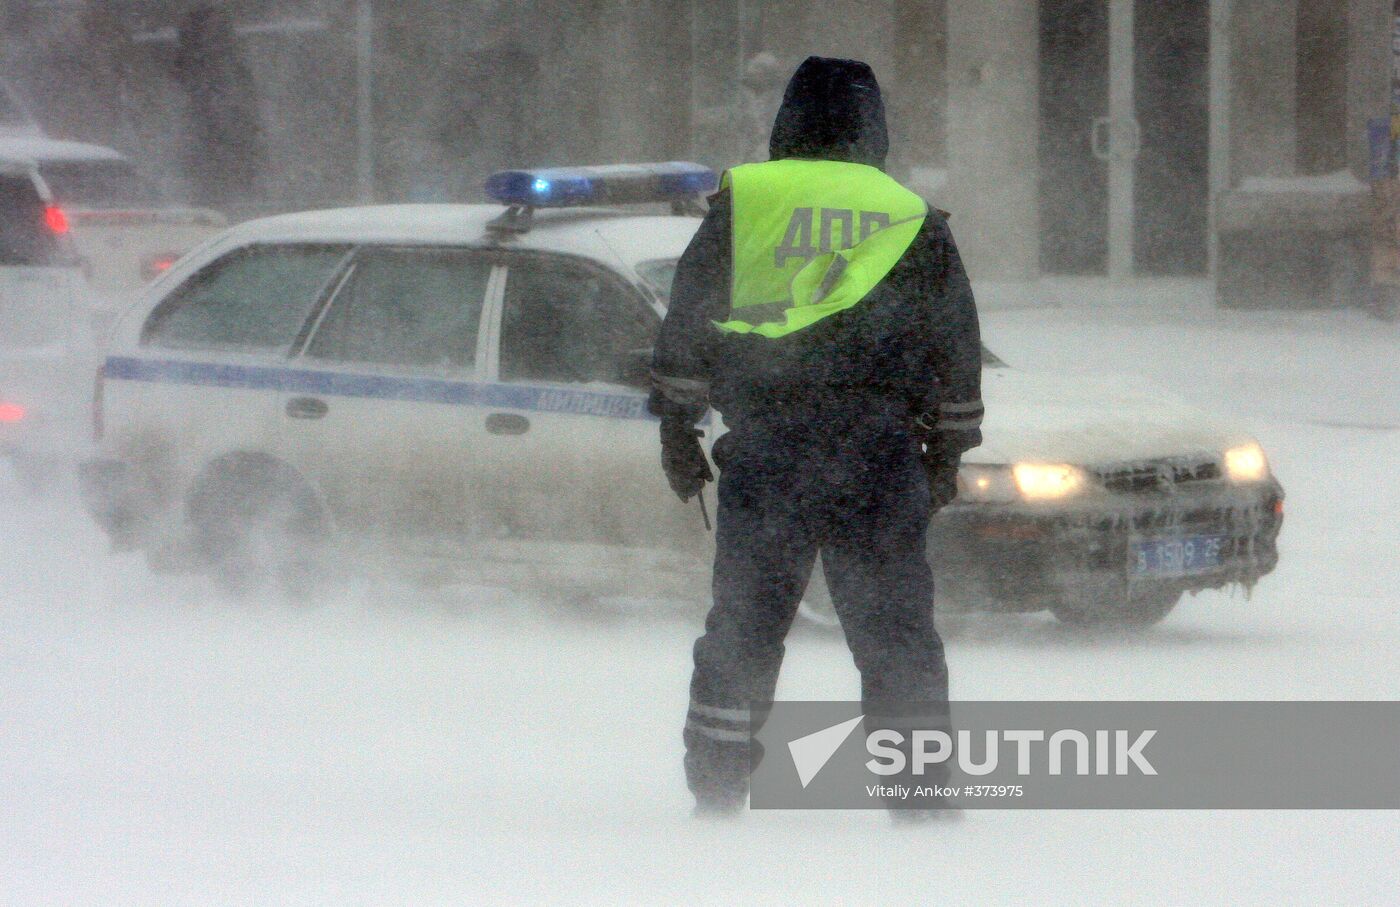 Russian traffic police at work